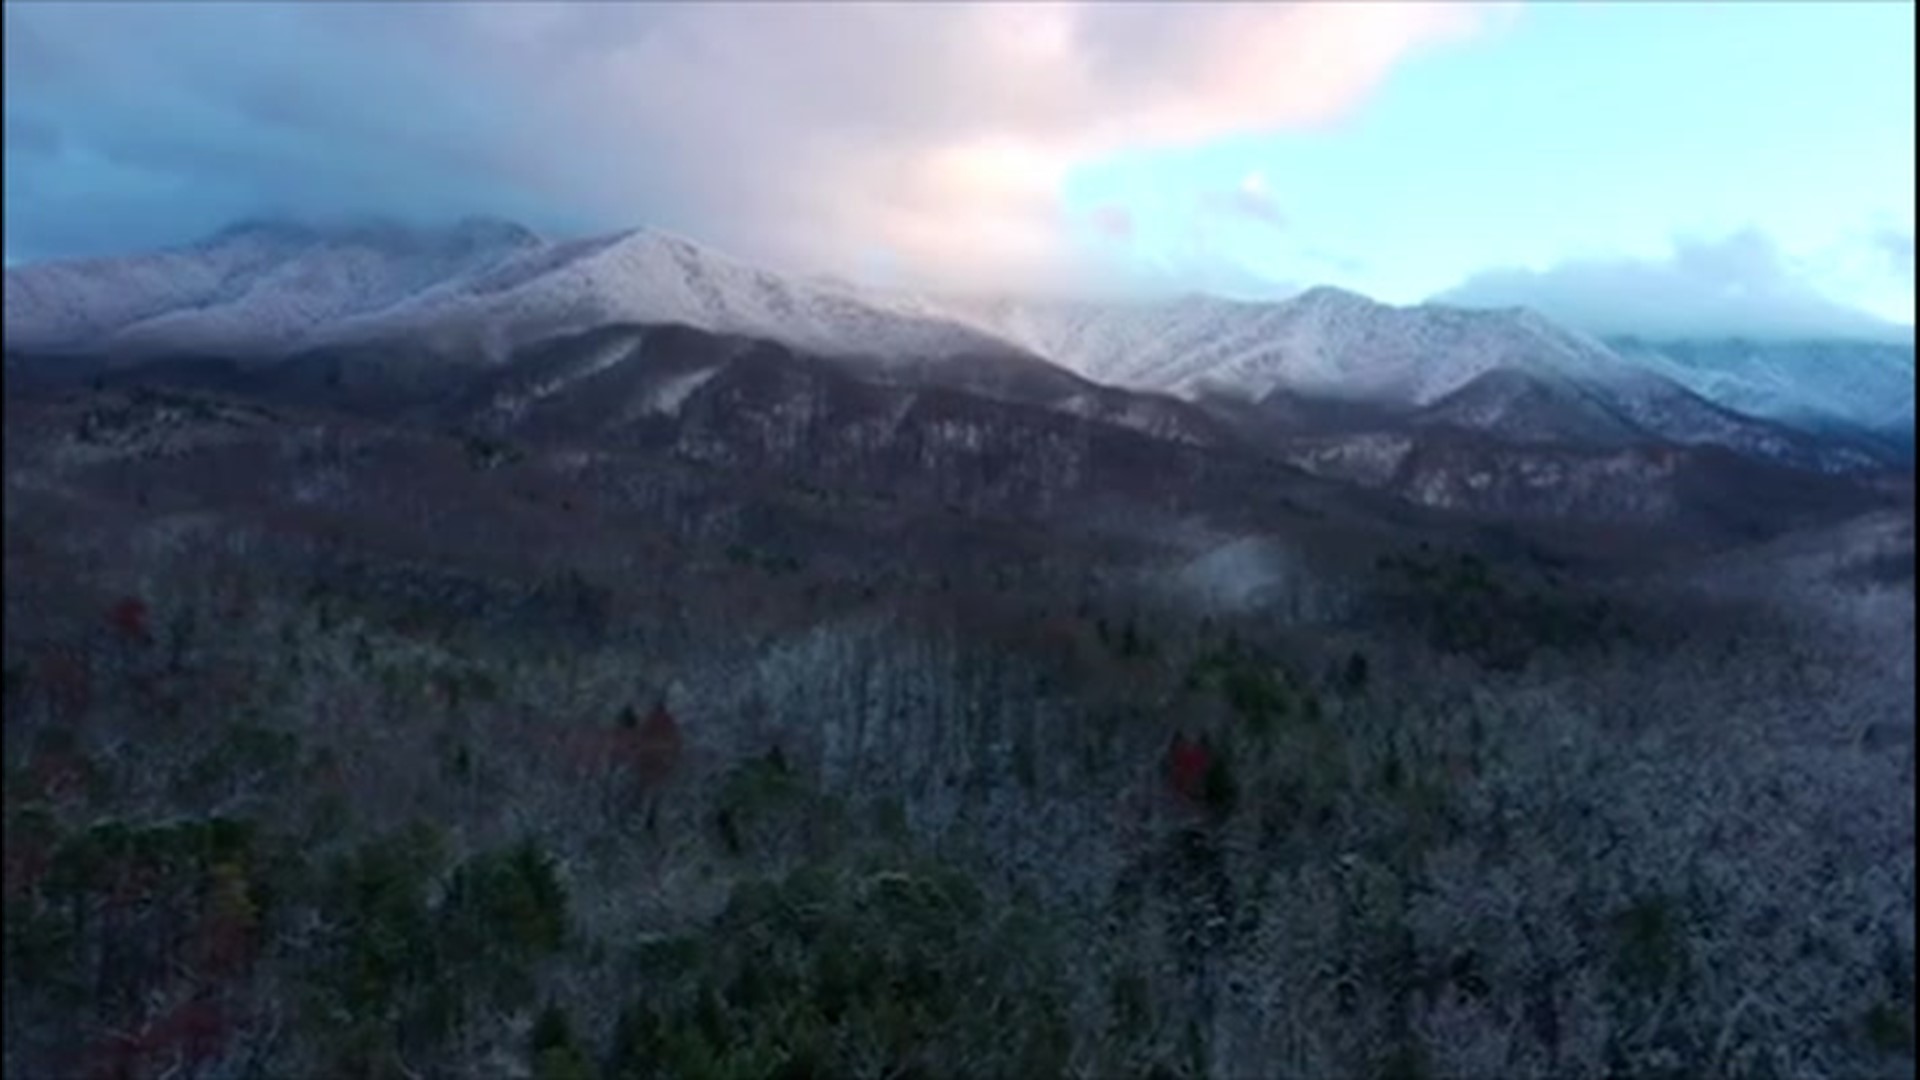 Enjoy these gorgeous drone shots of a snowy sunset over the Great Smoky Mountains from Pittman Center, Tennessee, on Dec. 1.